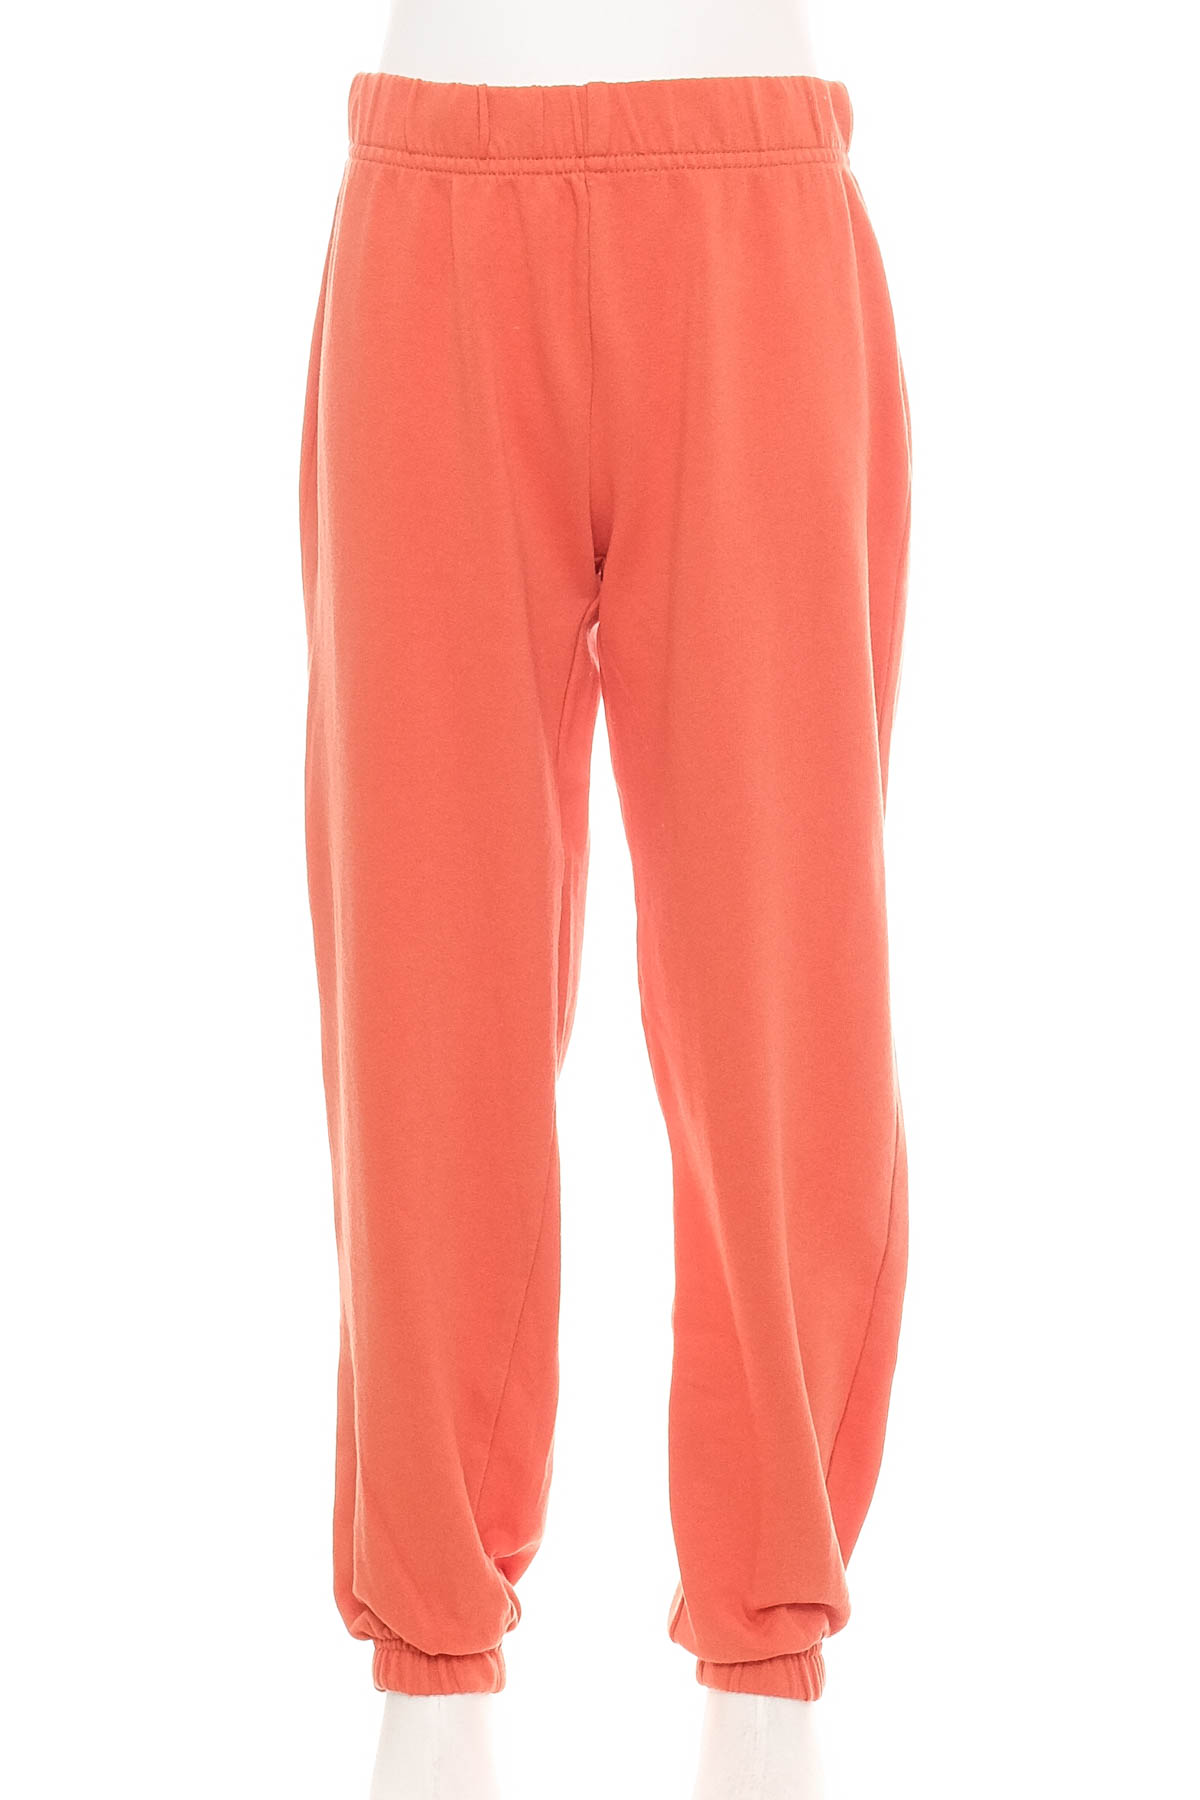 Trousers for girl - Gina Tricot - 0